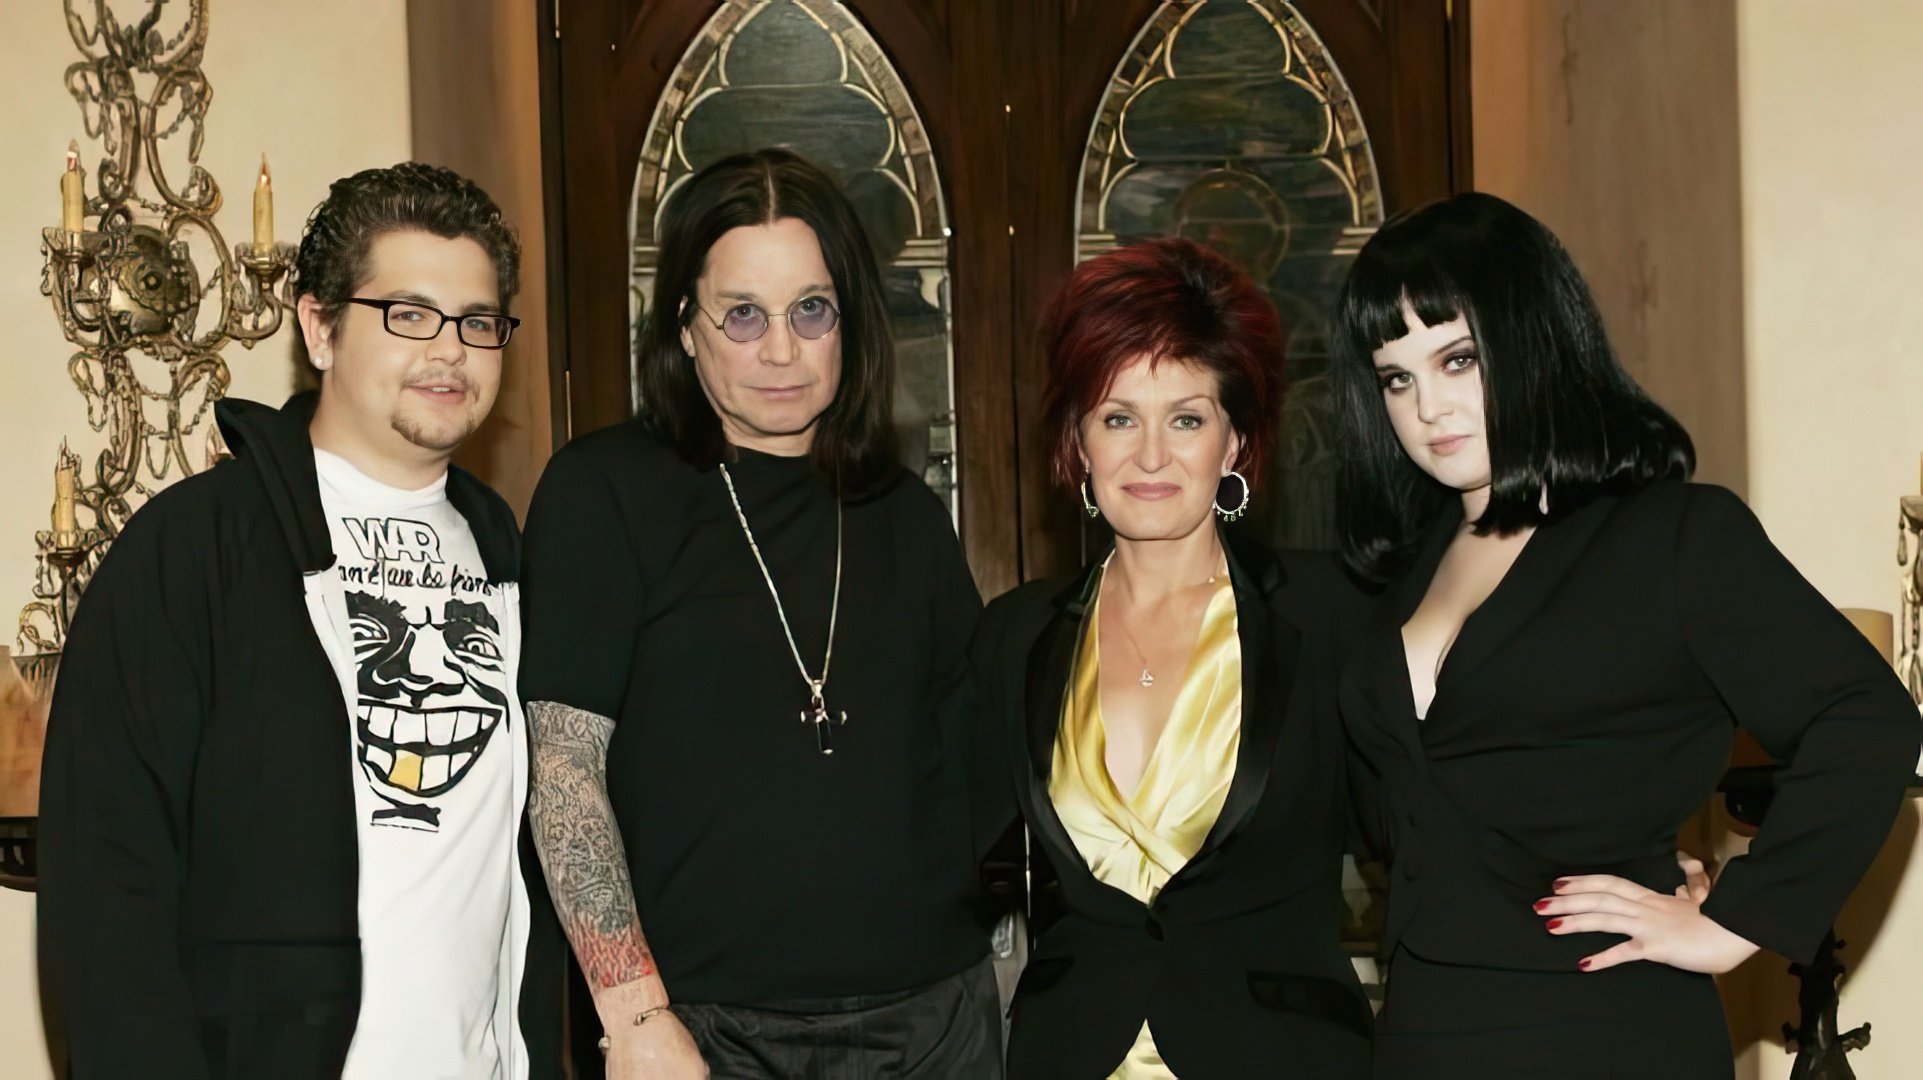 The reality show “The Osbournes” was broadcasted on MTV